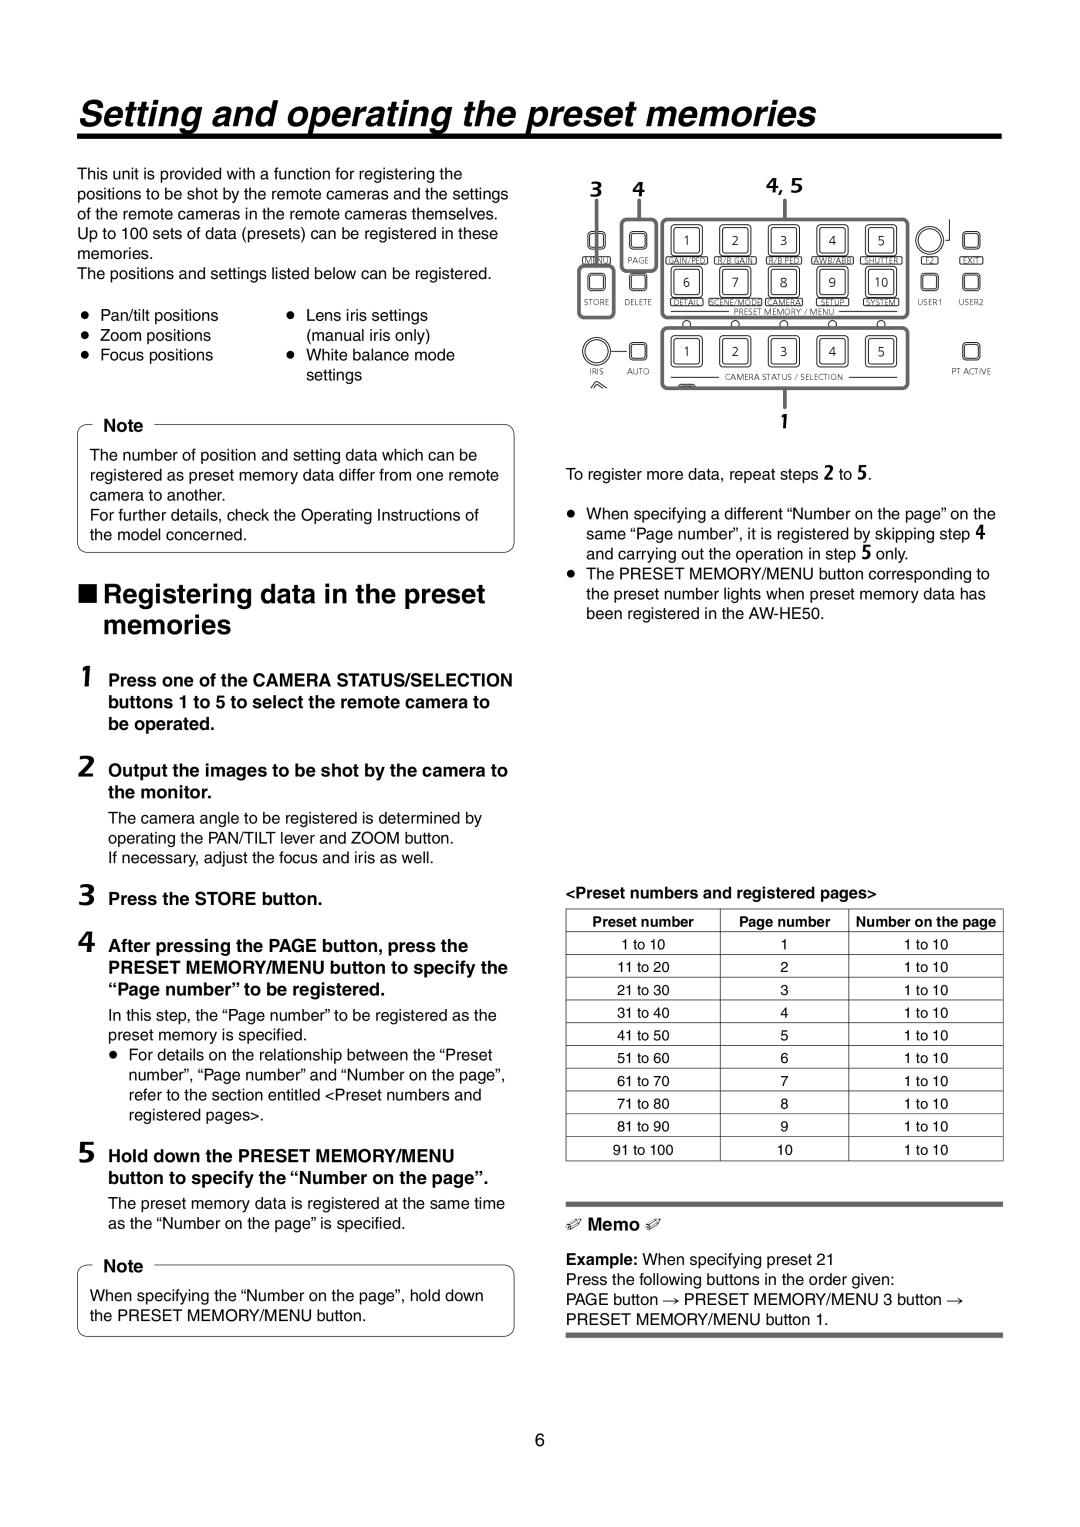 Panasonic AW-RP50N operating instructions Setting and operating the preset memories, Preset numbers and registered pages 